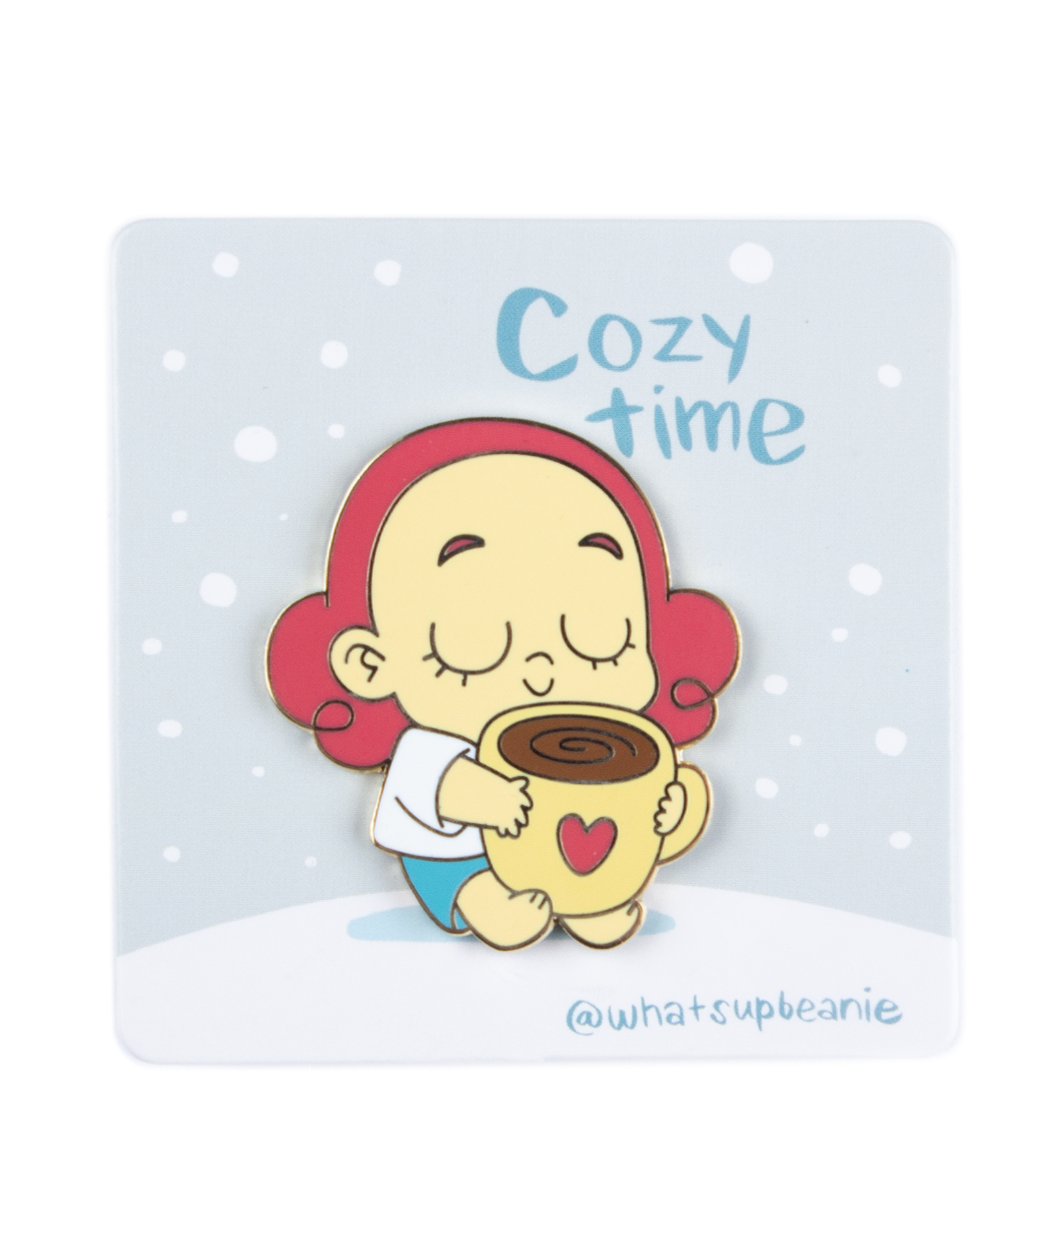 A pin of Beanie closing their eyes, with a smile holding a big mug of coffee with a heart on the front of the mug. The pin is on a card backing with falling snow and the words "Cozy Time; @whatsupbeanie". 